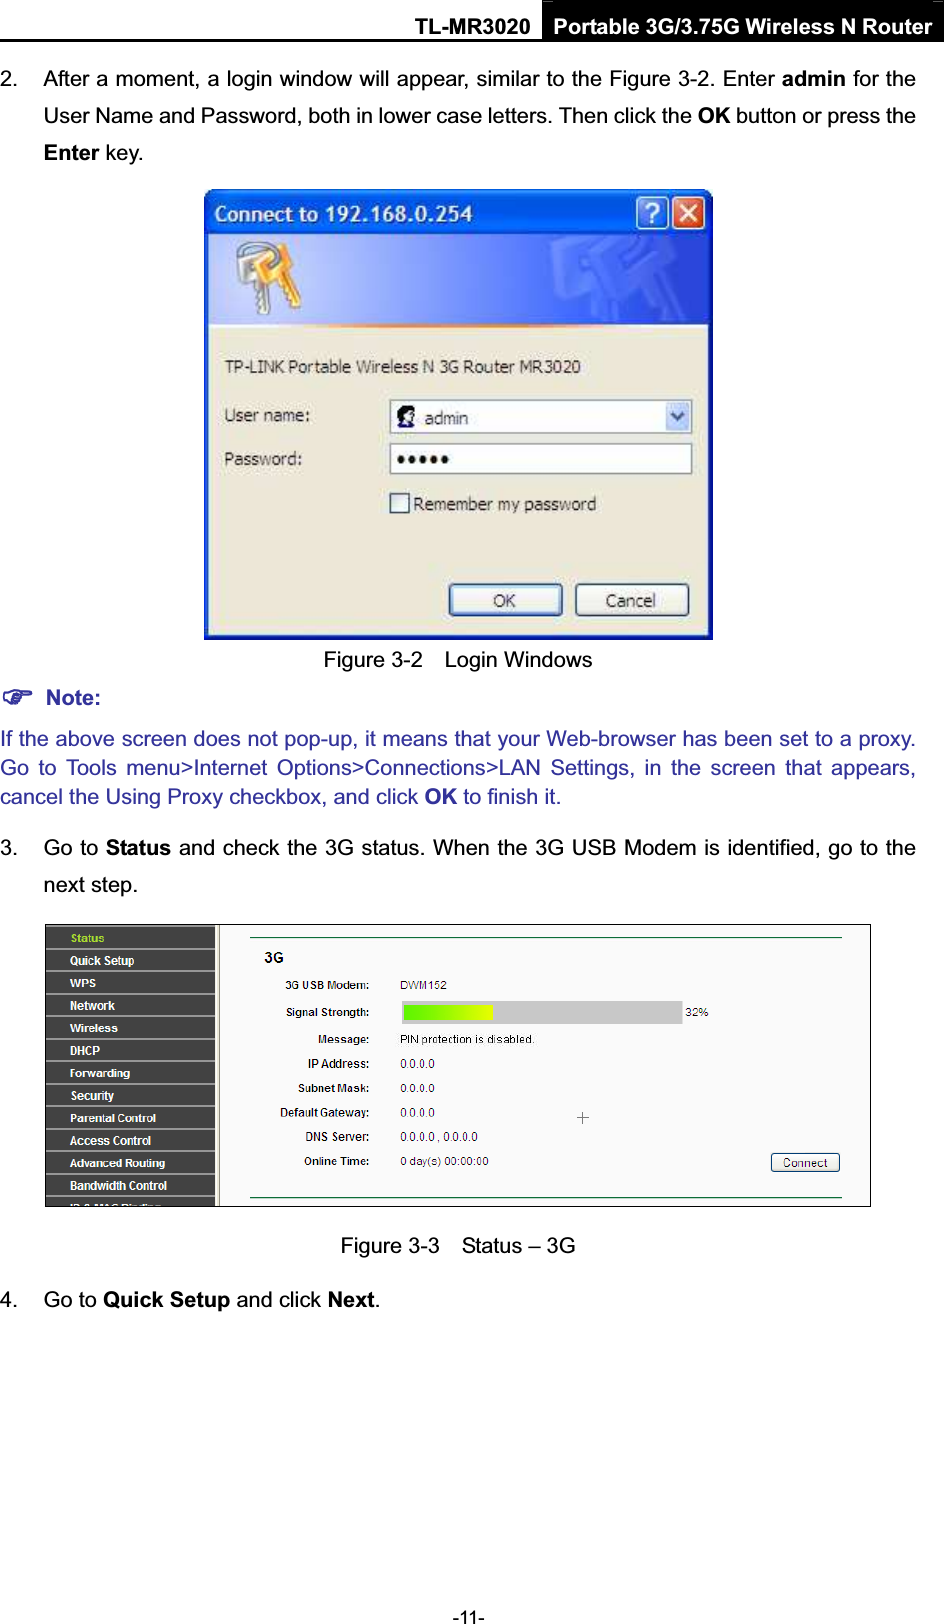 TL-MR3020 Portable 3G/3.75G Wireless N Router-11- 2.  After a moment, a login window will appear, similar to the Figure 3-2. Enter admin for the User Name and Password, both in lower case letters. Then click the OK button or press the Enter key. Figure 3-2    Login Windows )Note:If the above screen does not pop-up, it means that your Web-browser has been set to a proxy. Go  to  Tools  menu&gt;Internet  Options&gt;Connections&gt;LAN  Settings,  in  the  screen  that  appears, cancel the Using Proxy checkbox, and click OK to finish it.3.  Go to Status and check the 3G status. When the 3G USB Modem is identified, go to the next step. Figure 3-3    Status – 3G 4.  Go to Quick Setup and click Next.